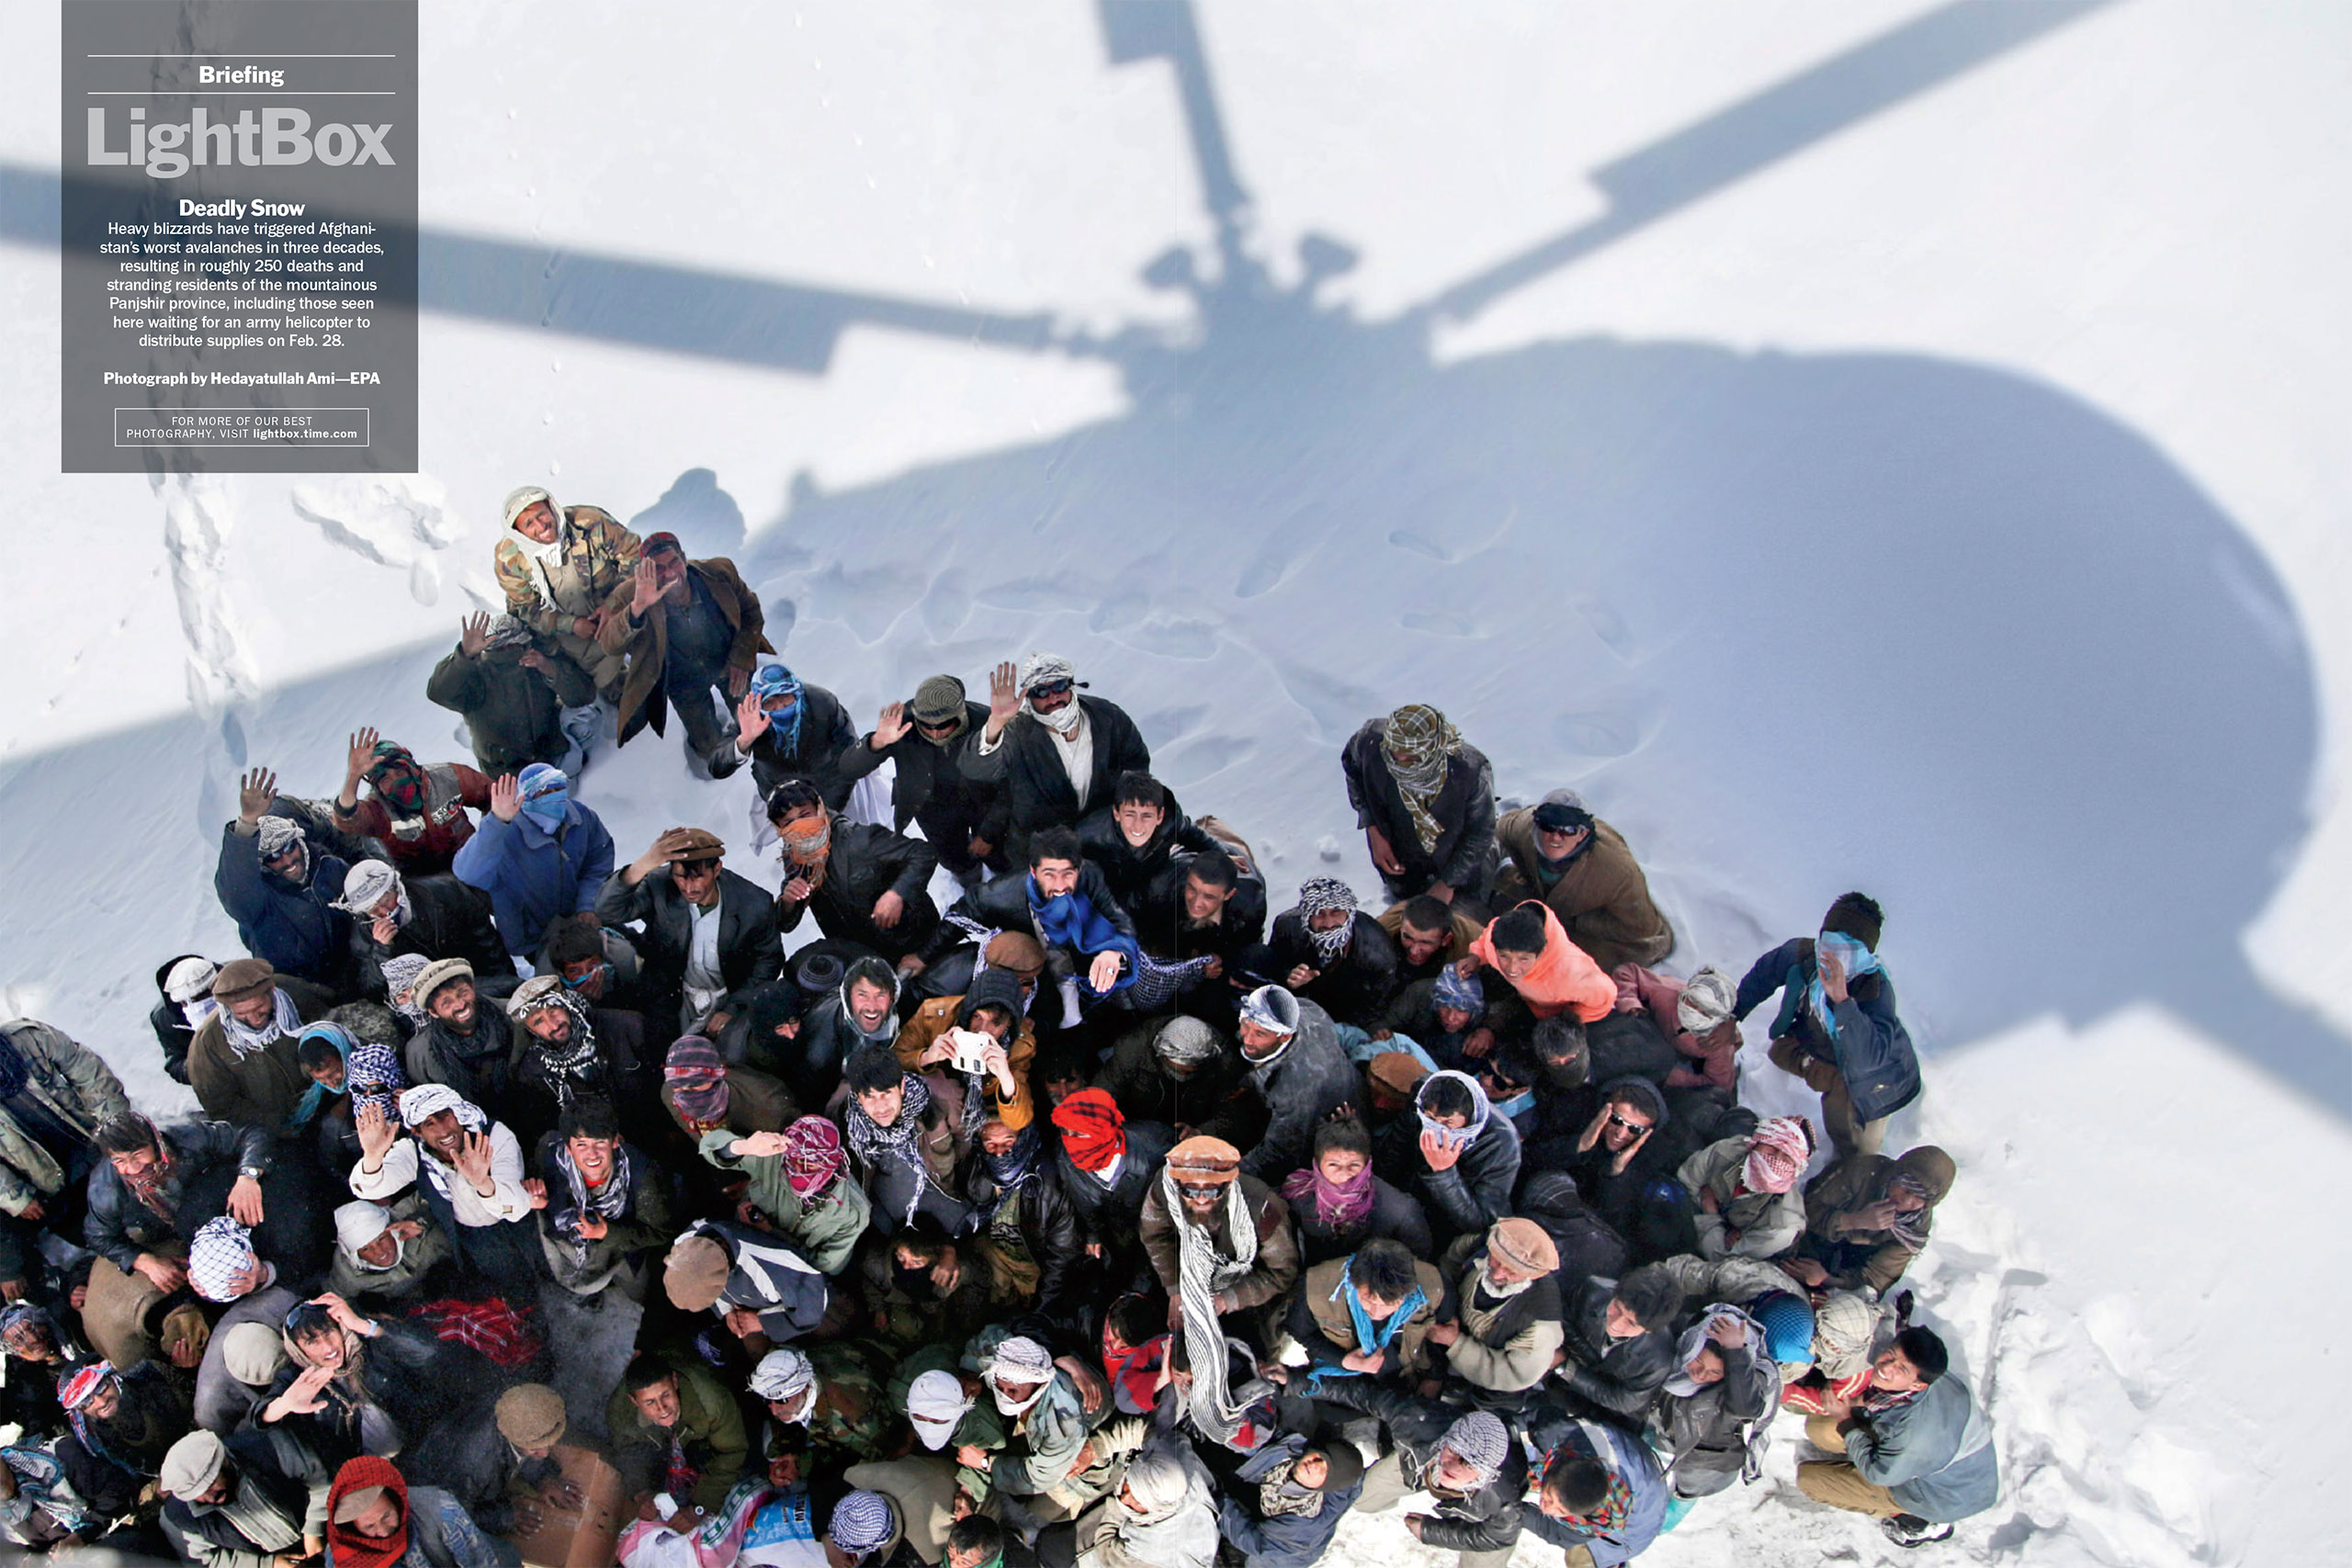 Photograph by Hedayatullah Amid—EPAHeavy blizzards have triggered Afghanistan's worst avalanches in three decades, resulting in roughly 250 deaths and stranding residents of the mountainous Panjshir province, including those seen here waiting for an army helicopter to distribute supplies on Feb. 28. (TIME issue March 16, 2015)